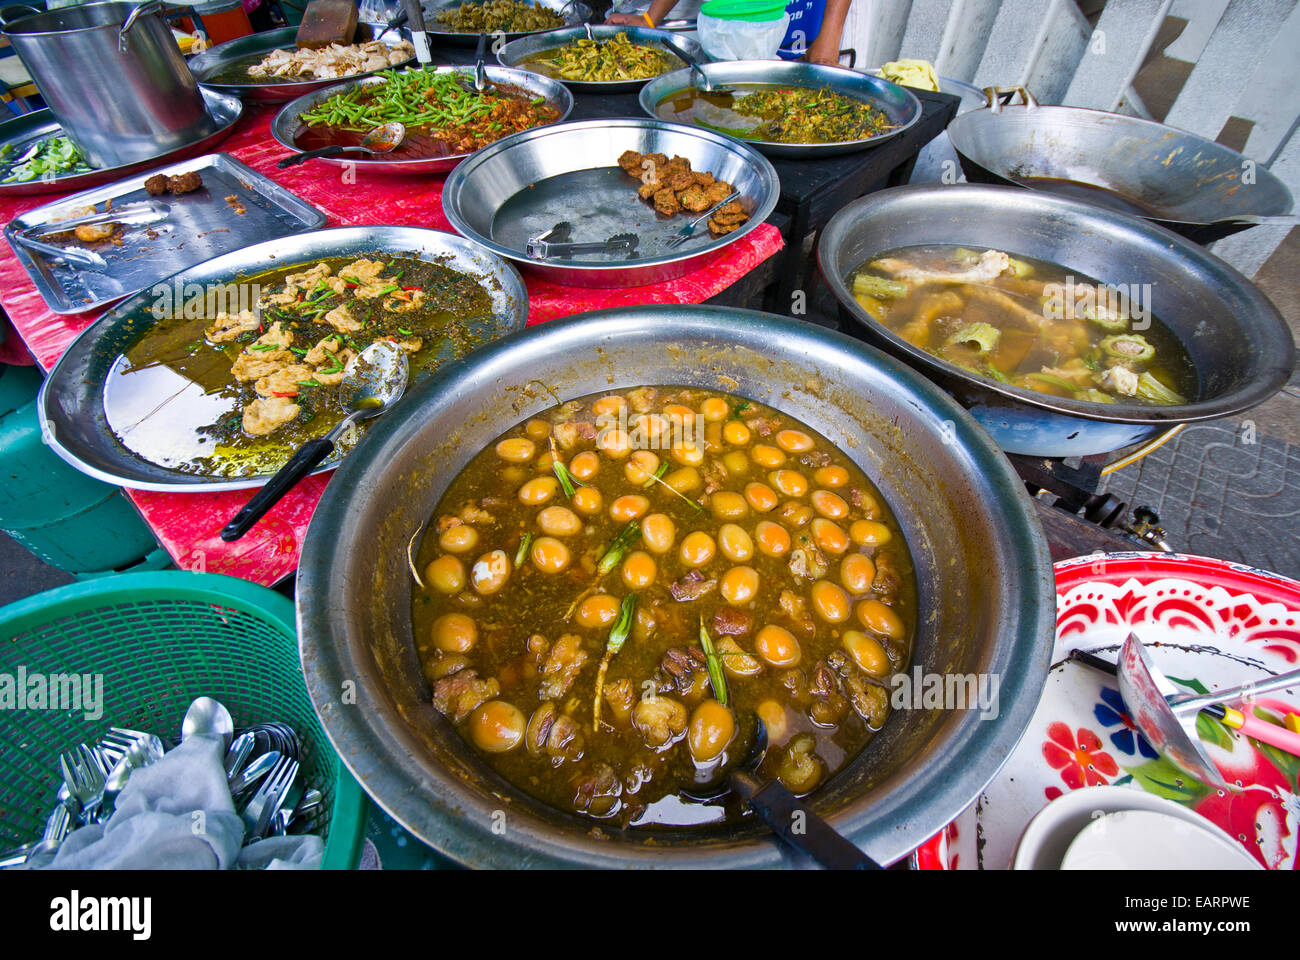 Large silver bowls contain curry and spicy eggs, chicken and seafood. Stock Photo